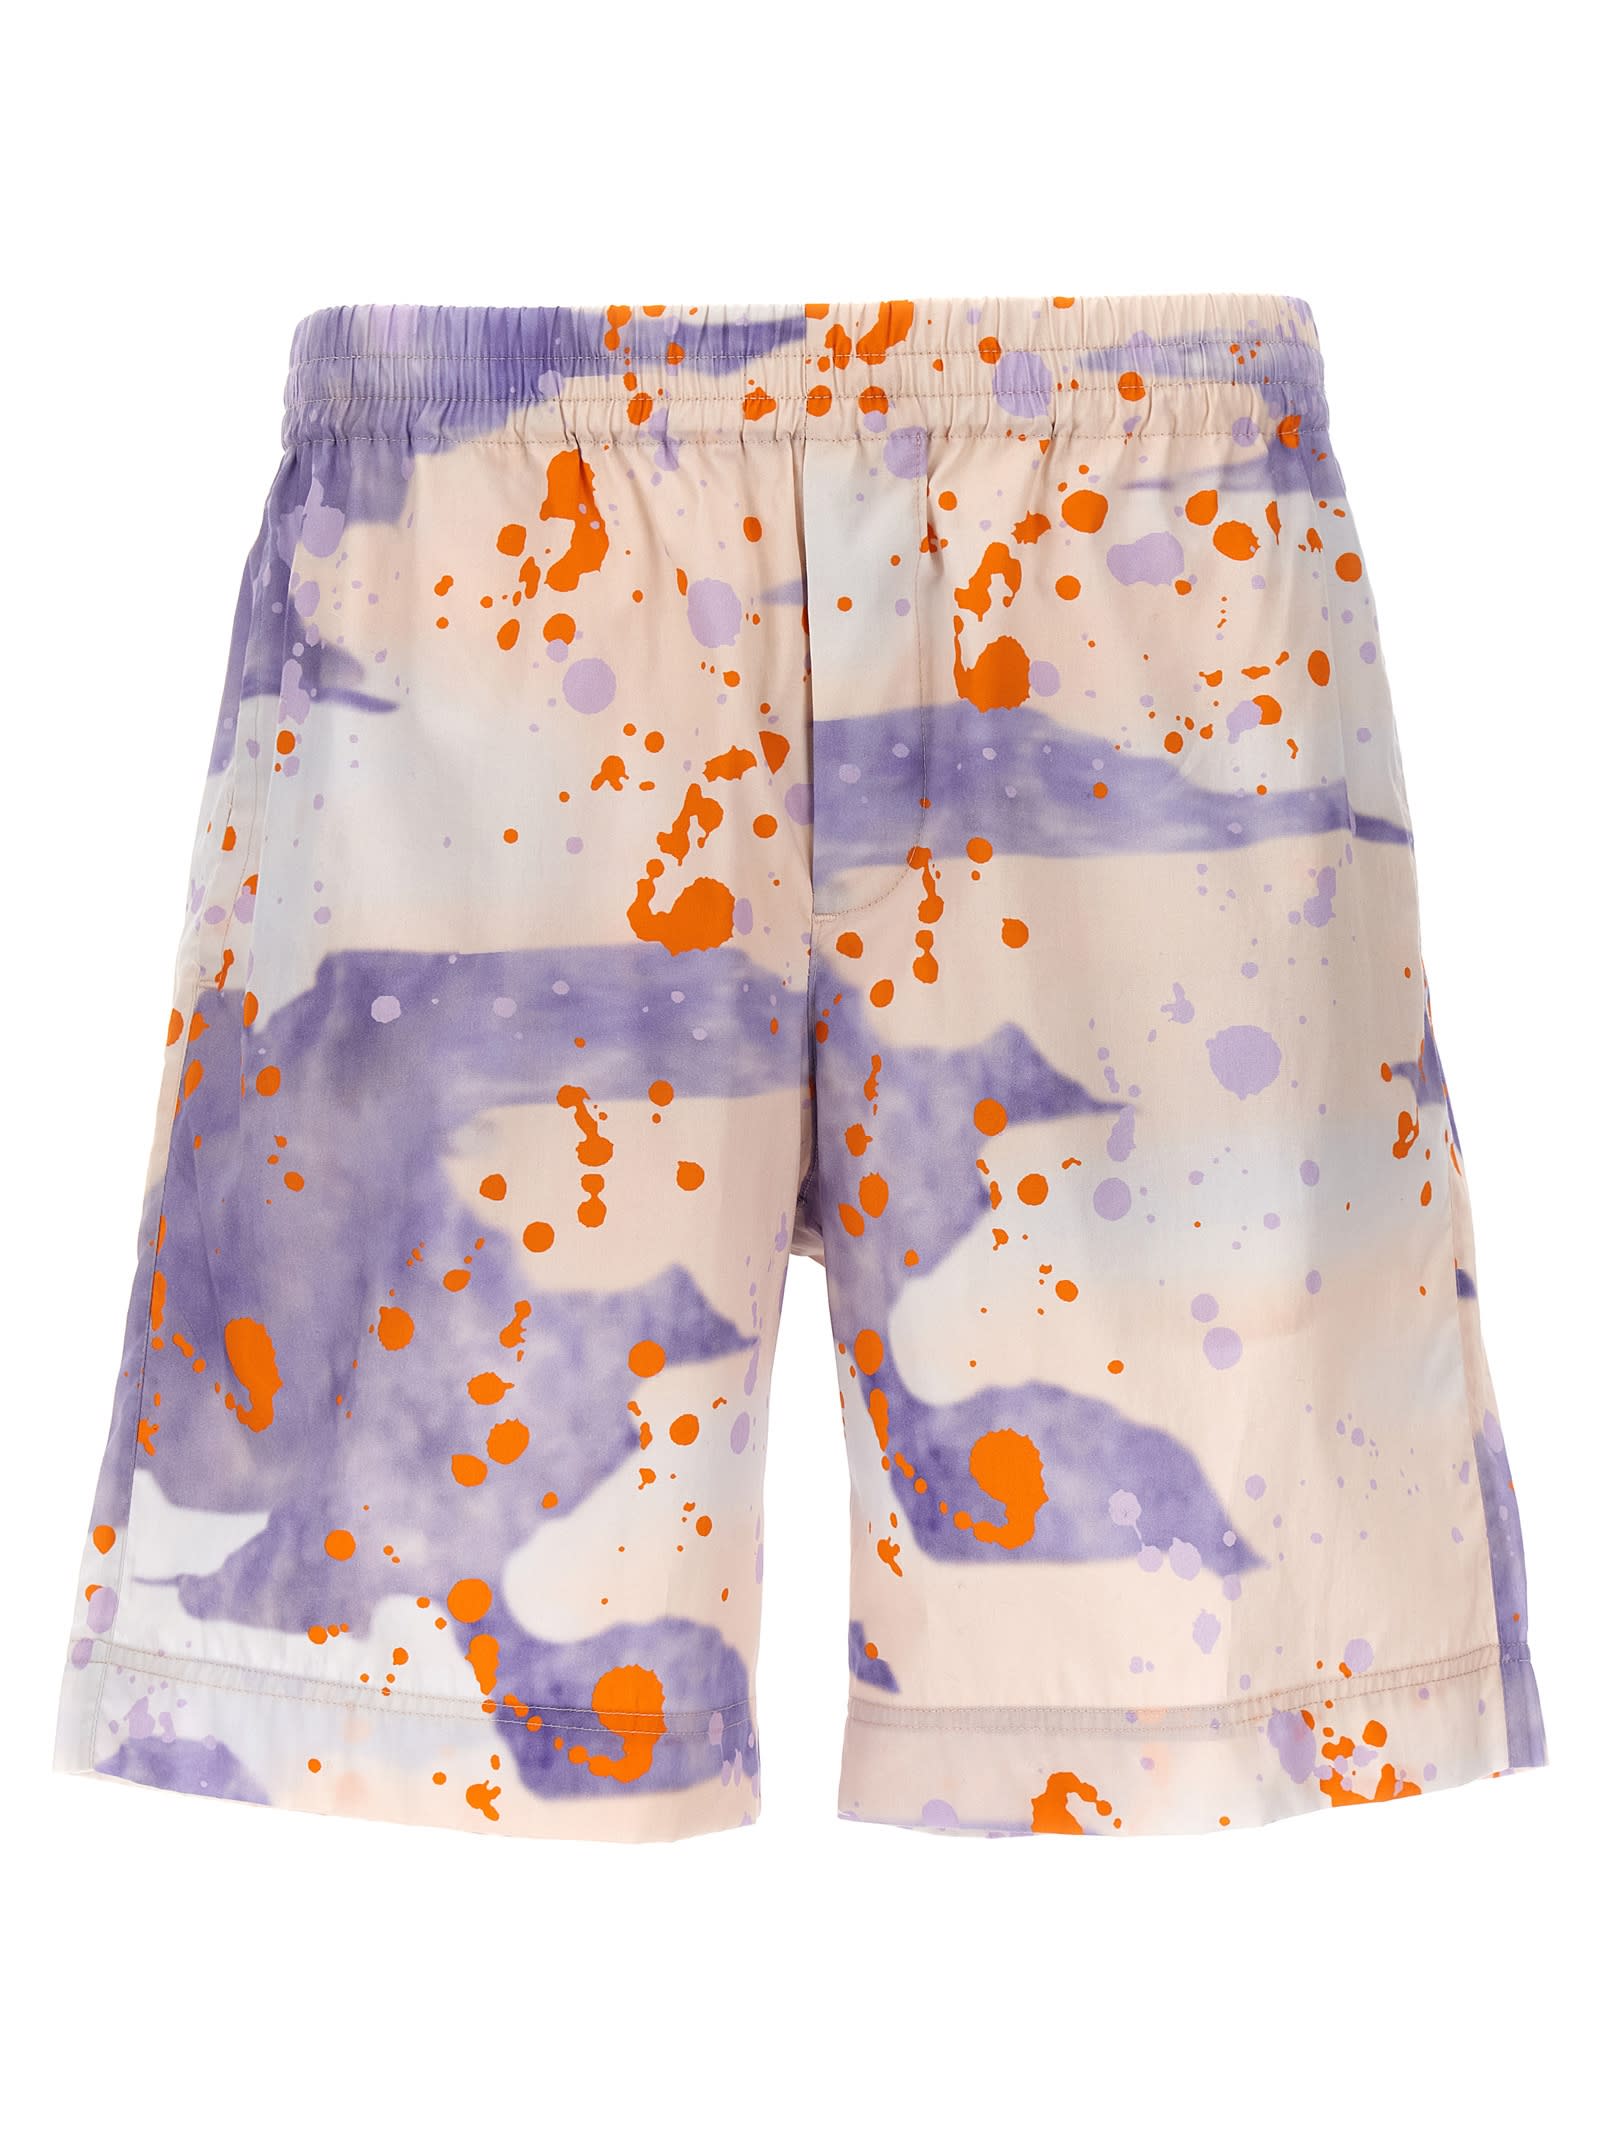 All-over Print Shorts